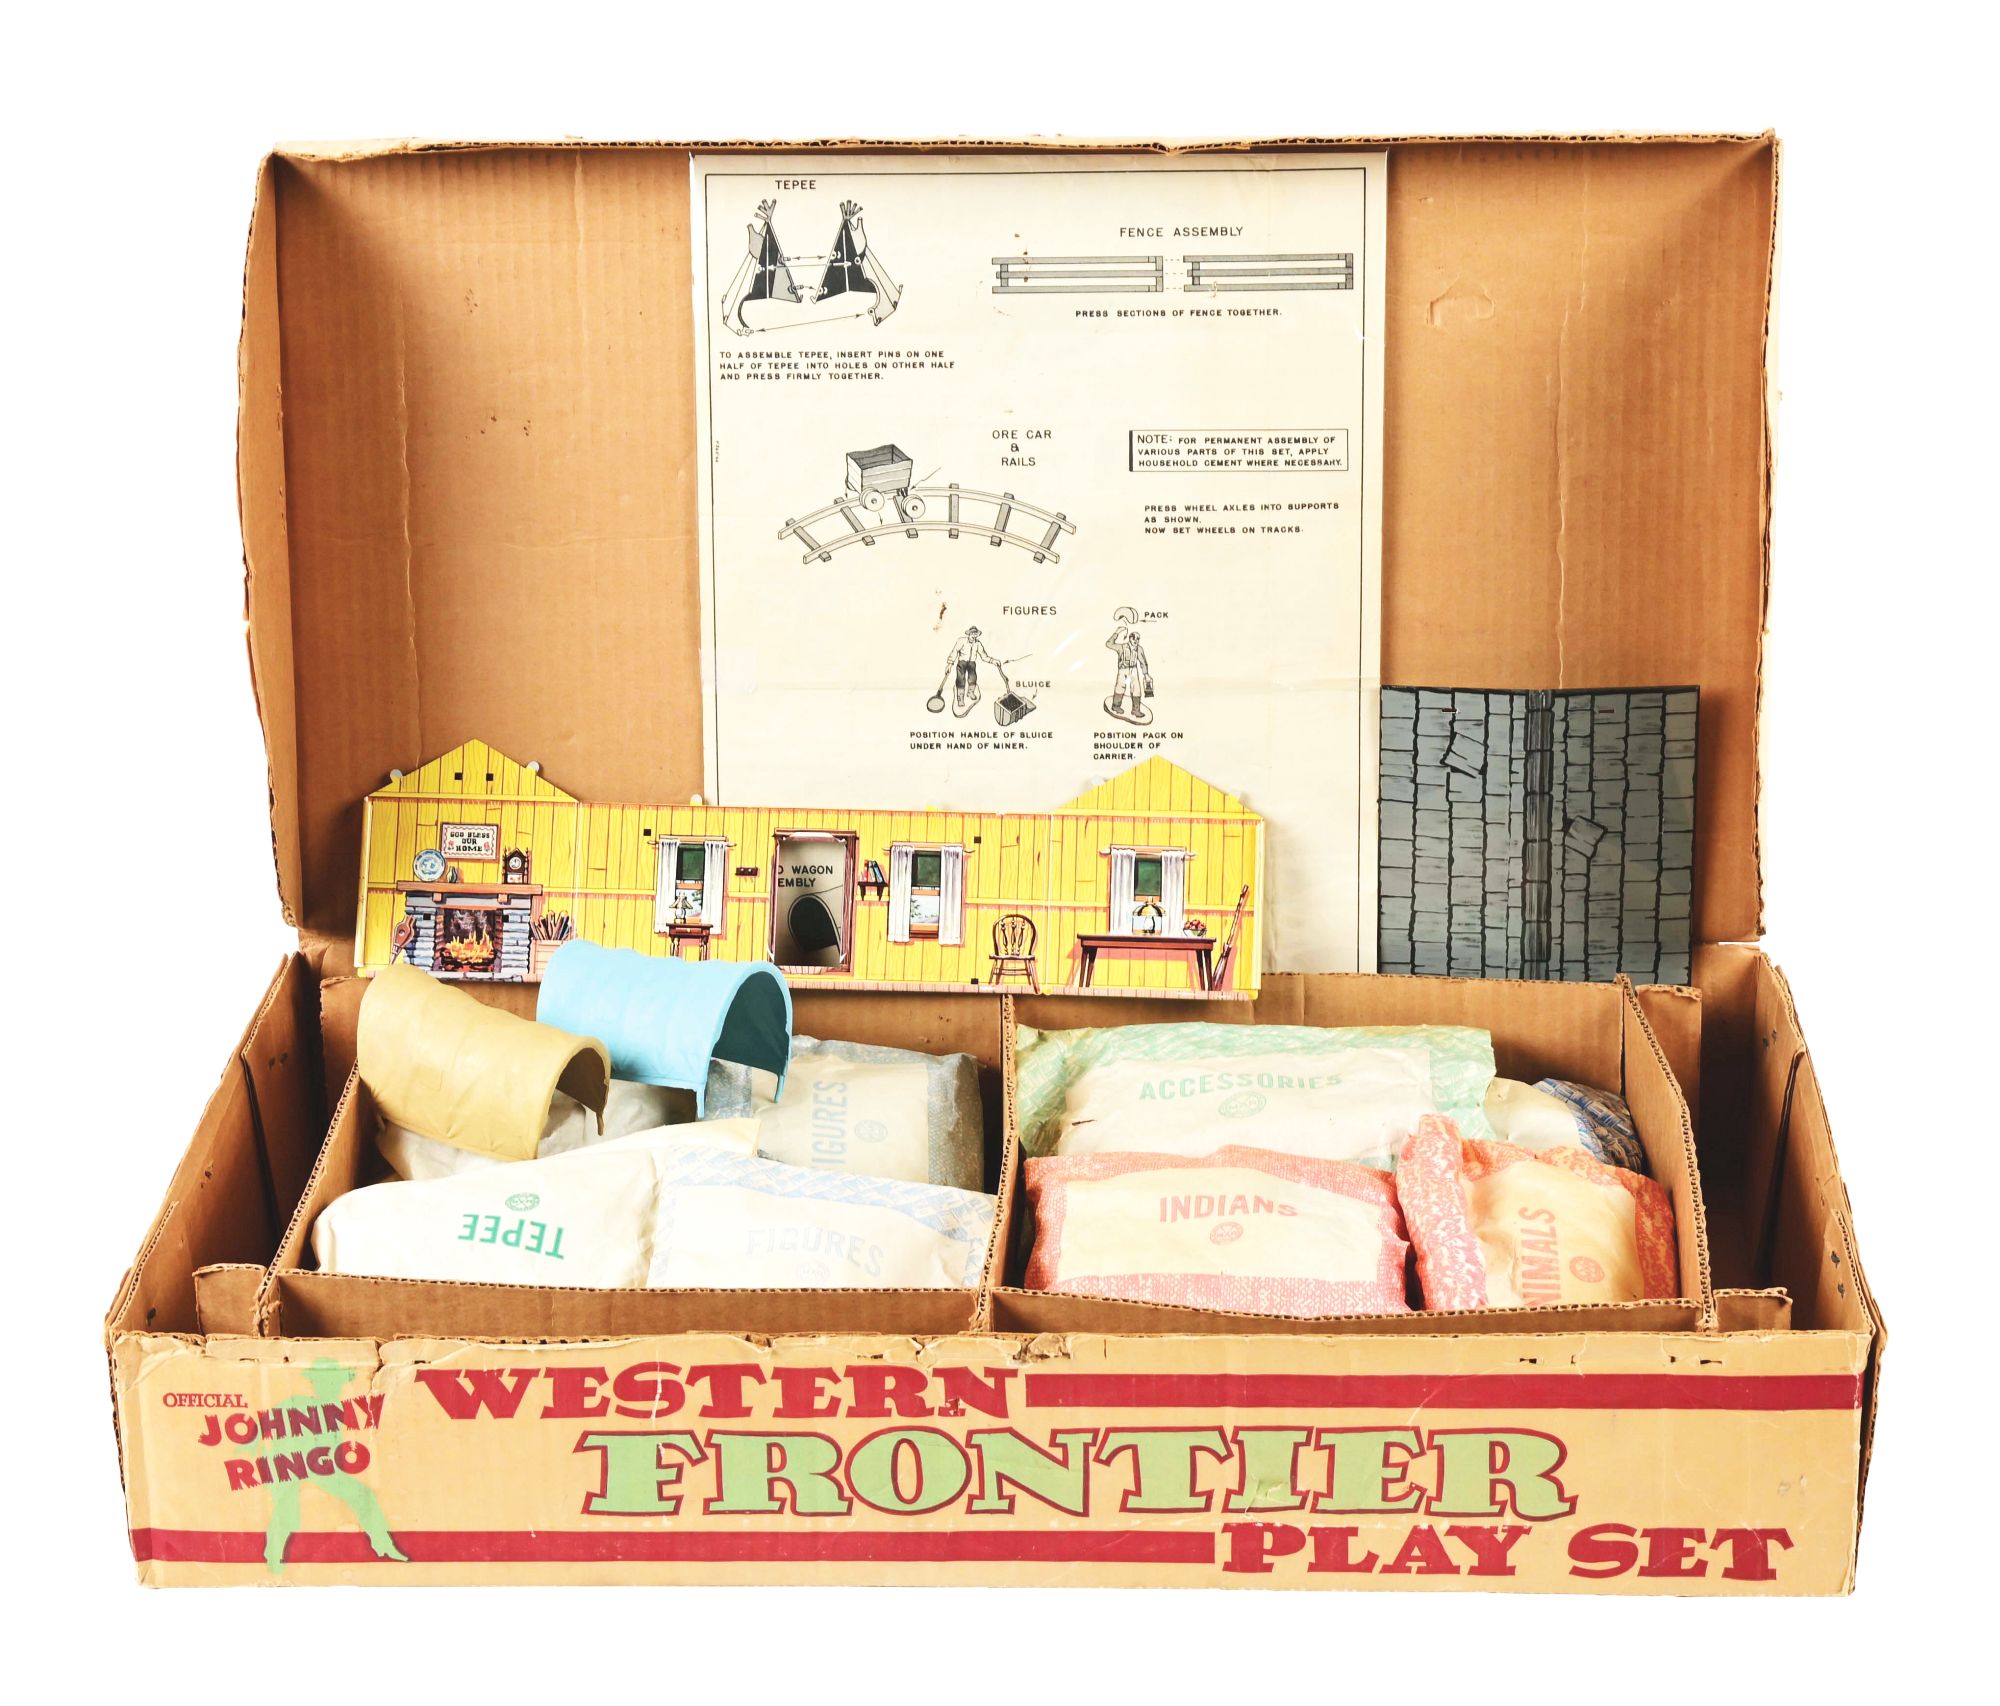 Very rare circa-1960 Marx Johnny Ringo Western Frontier Play Set. Includes house, gold mine, trees, wagons, horses, cowboys, Indians, and many other accessories. Excellent condition. Estimate $4,000-$6,000